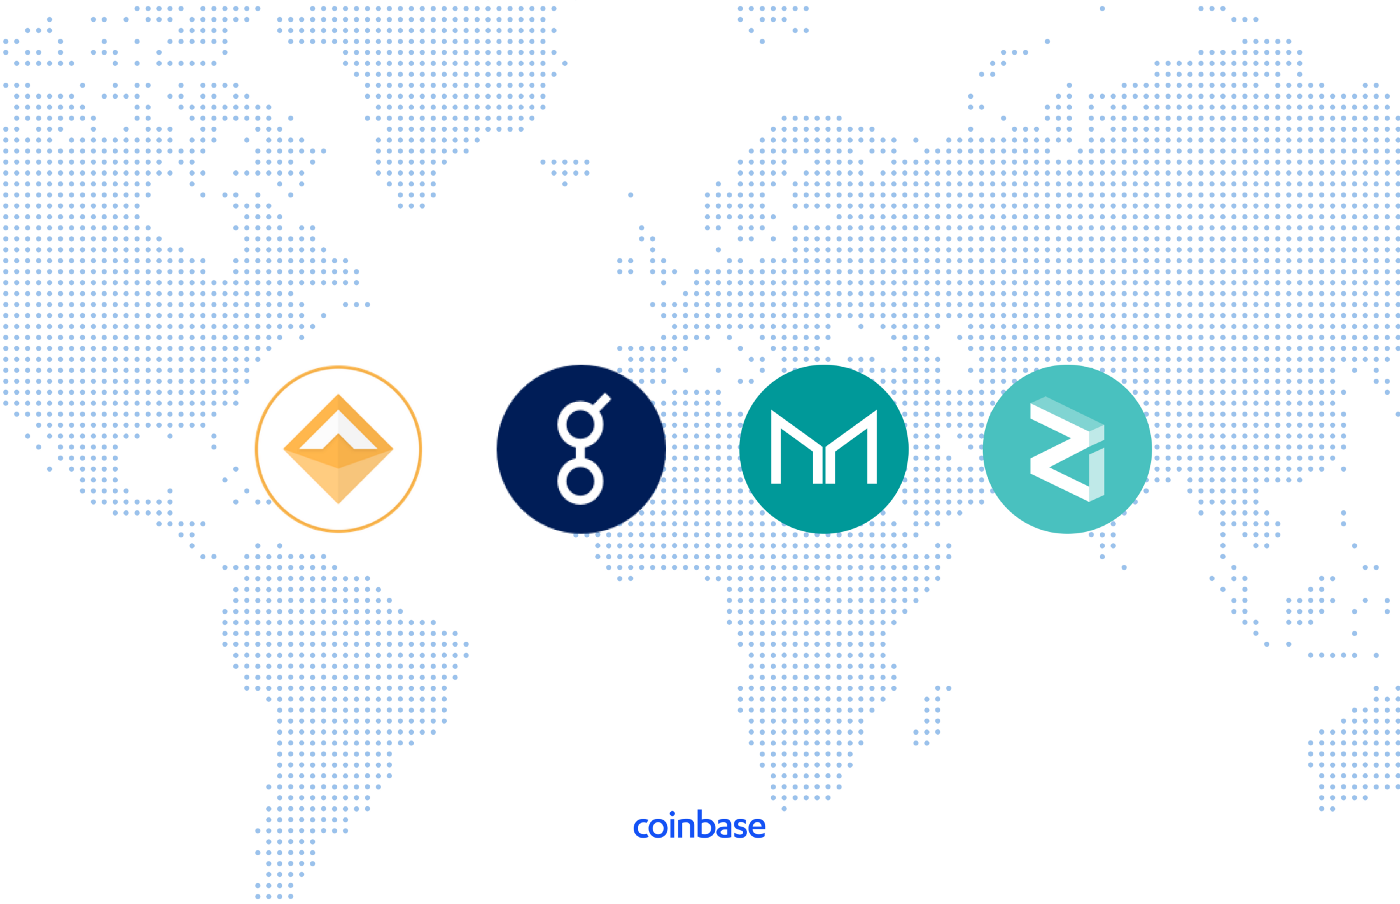 Ethereum tokens Dai (DAI), Golem (GNT), Maker (MKR), and Zilliqa (ZIL) have launched on Coinbase Pro in select jurisdictions